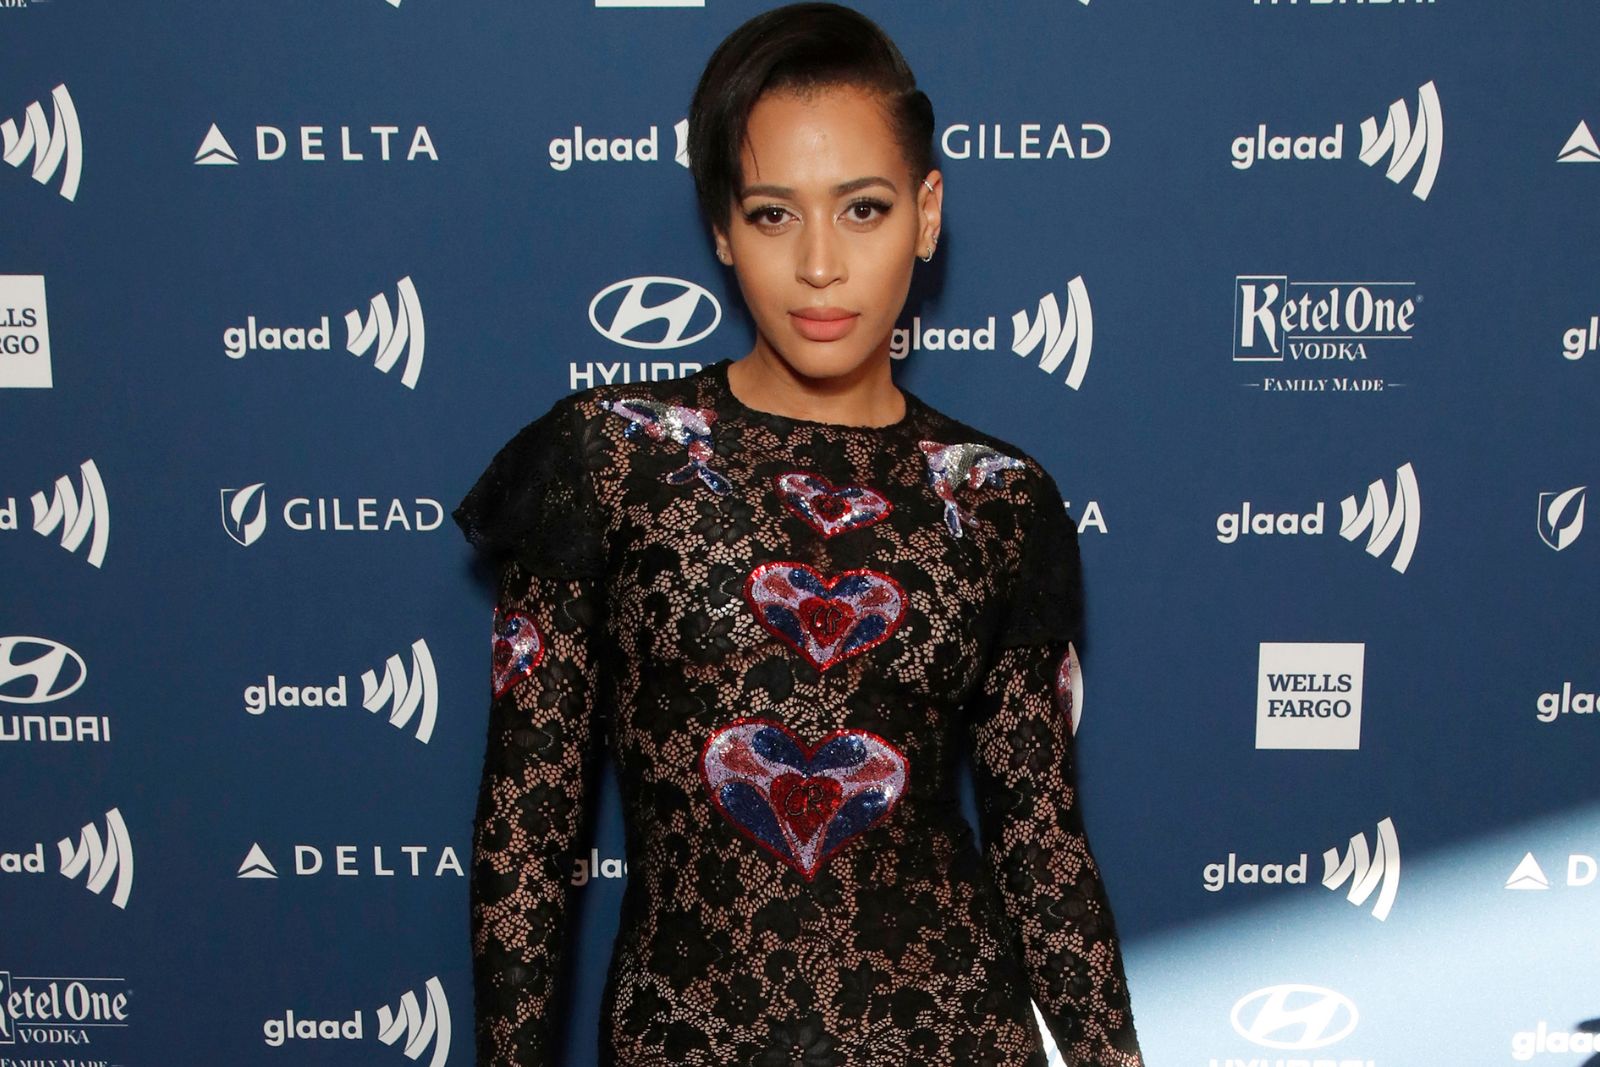 <p class="wp-caption-text">Image Credit: Shutterstock / Kathy Hutchins</p>  <p><span>Isis King gained attention on “America’s Next Top Model” before moving into acting with roles in “When They See Us.” As one of the first openly transgender people on reality TV, King faced public scrutiny but has used her platform to advocate for transgender rights and inclusion.</span></p>